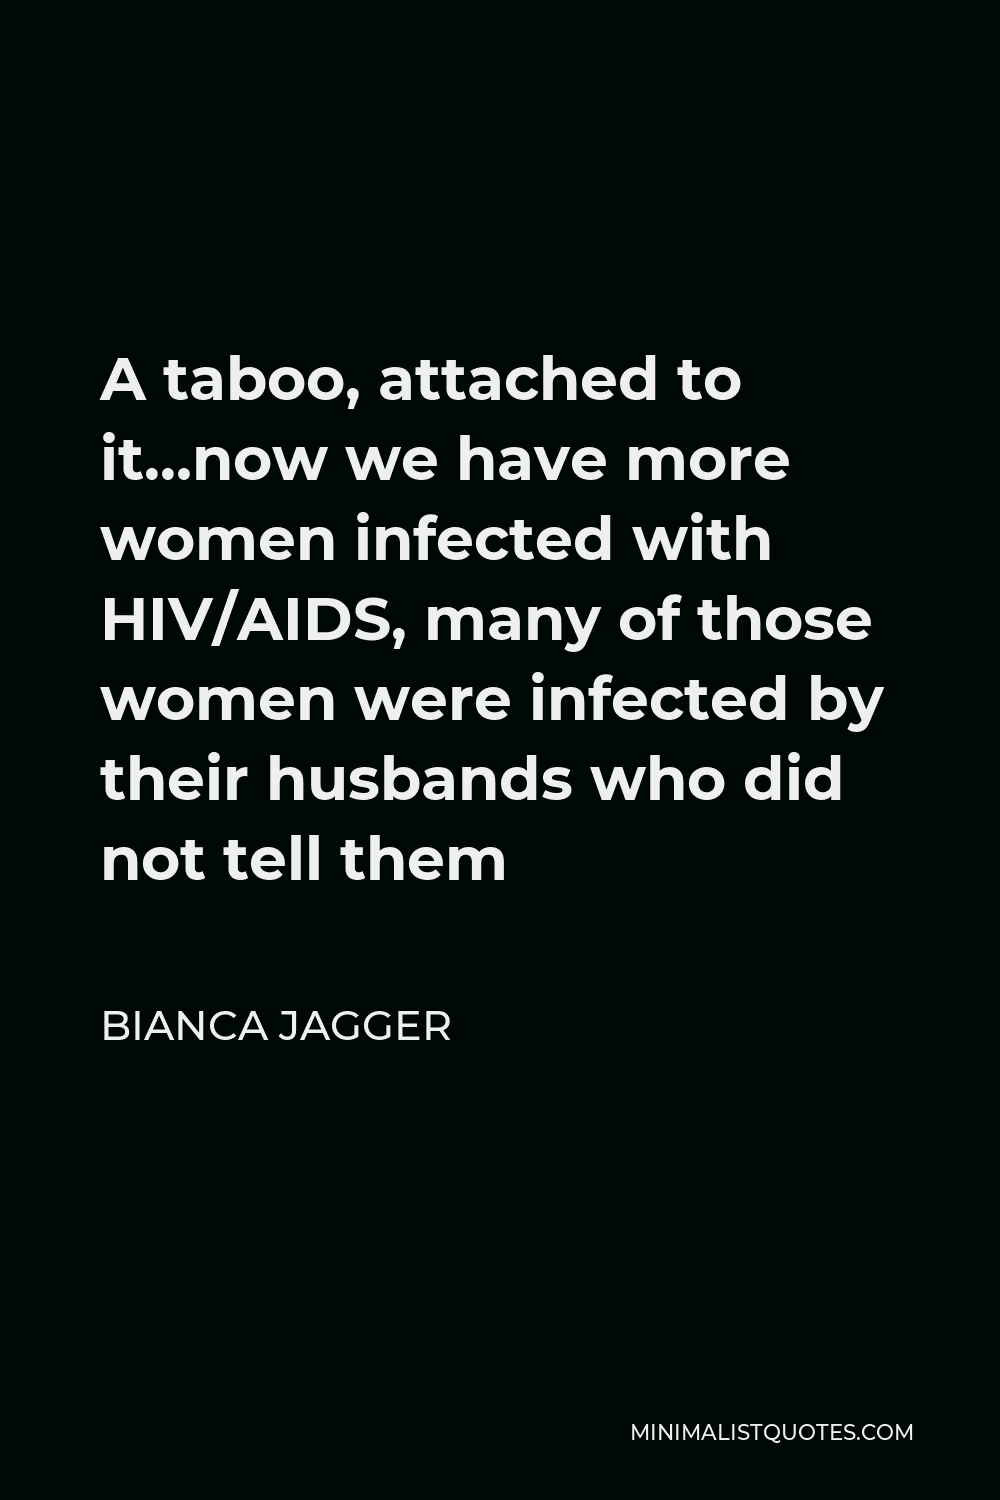 Bianca Jagger Quote - A taboo, attached to it…now we have more women infected with HIV/AIDS, many of those women were infected by their husbands who did not tell them